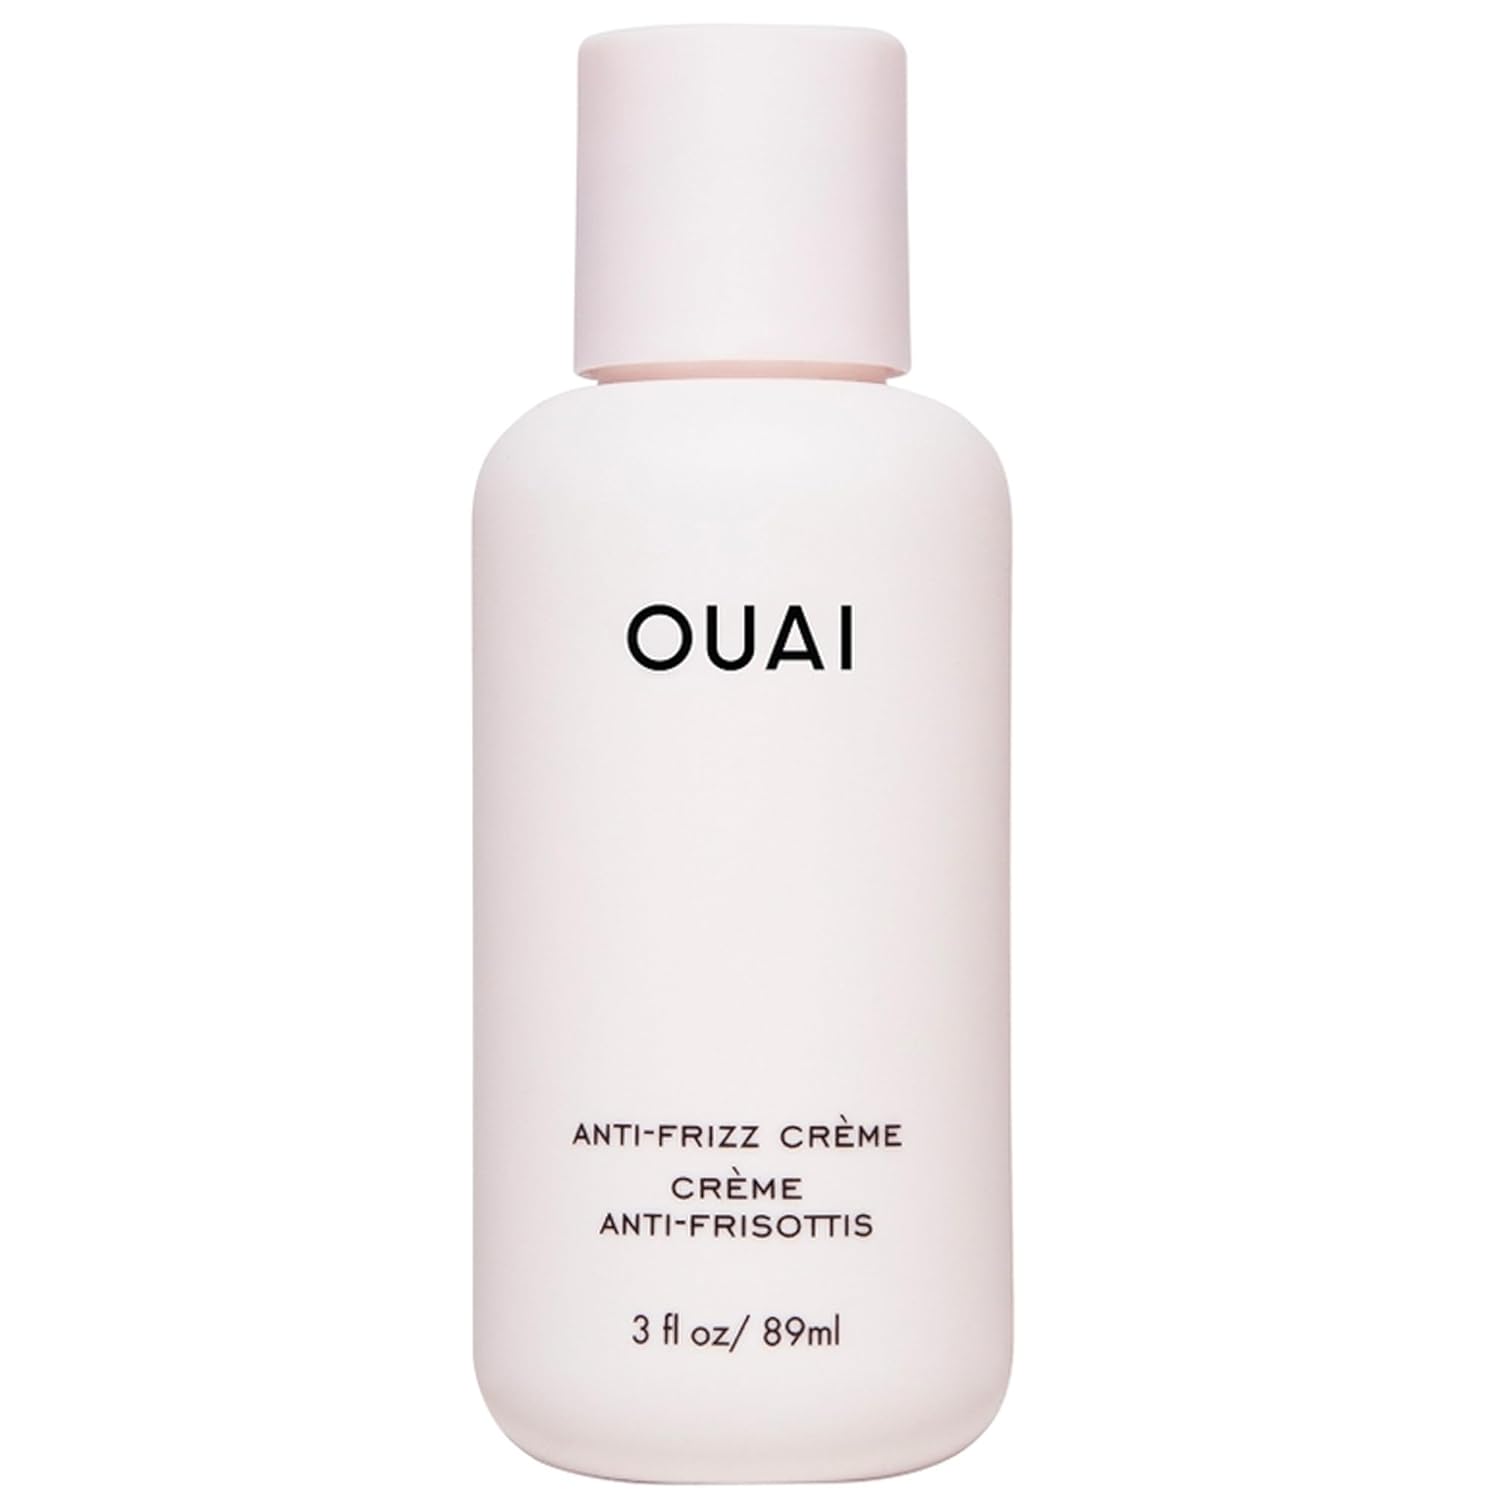 OUAI Anti Frizz Cream Travel Size - Moisturizing Hair Cream with Frizz Control & Heat Protection - Provides Hydration with Jackfruit & Beetroot Extract - Paraben, Phthalate & Sulfate Free (3 oz)